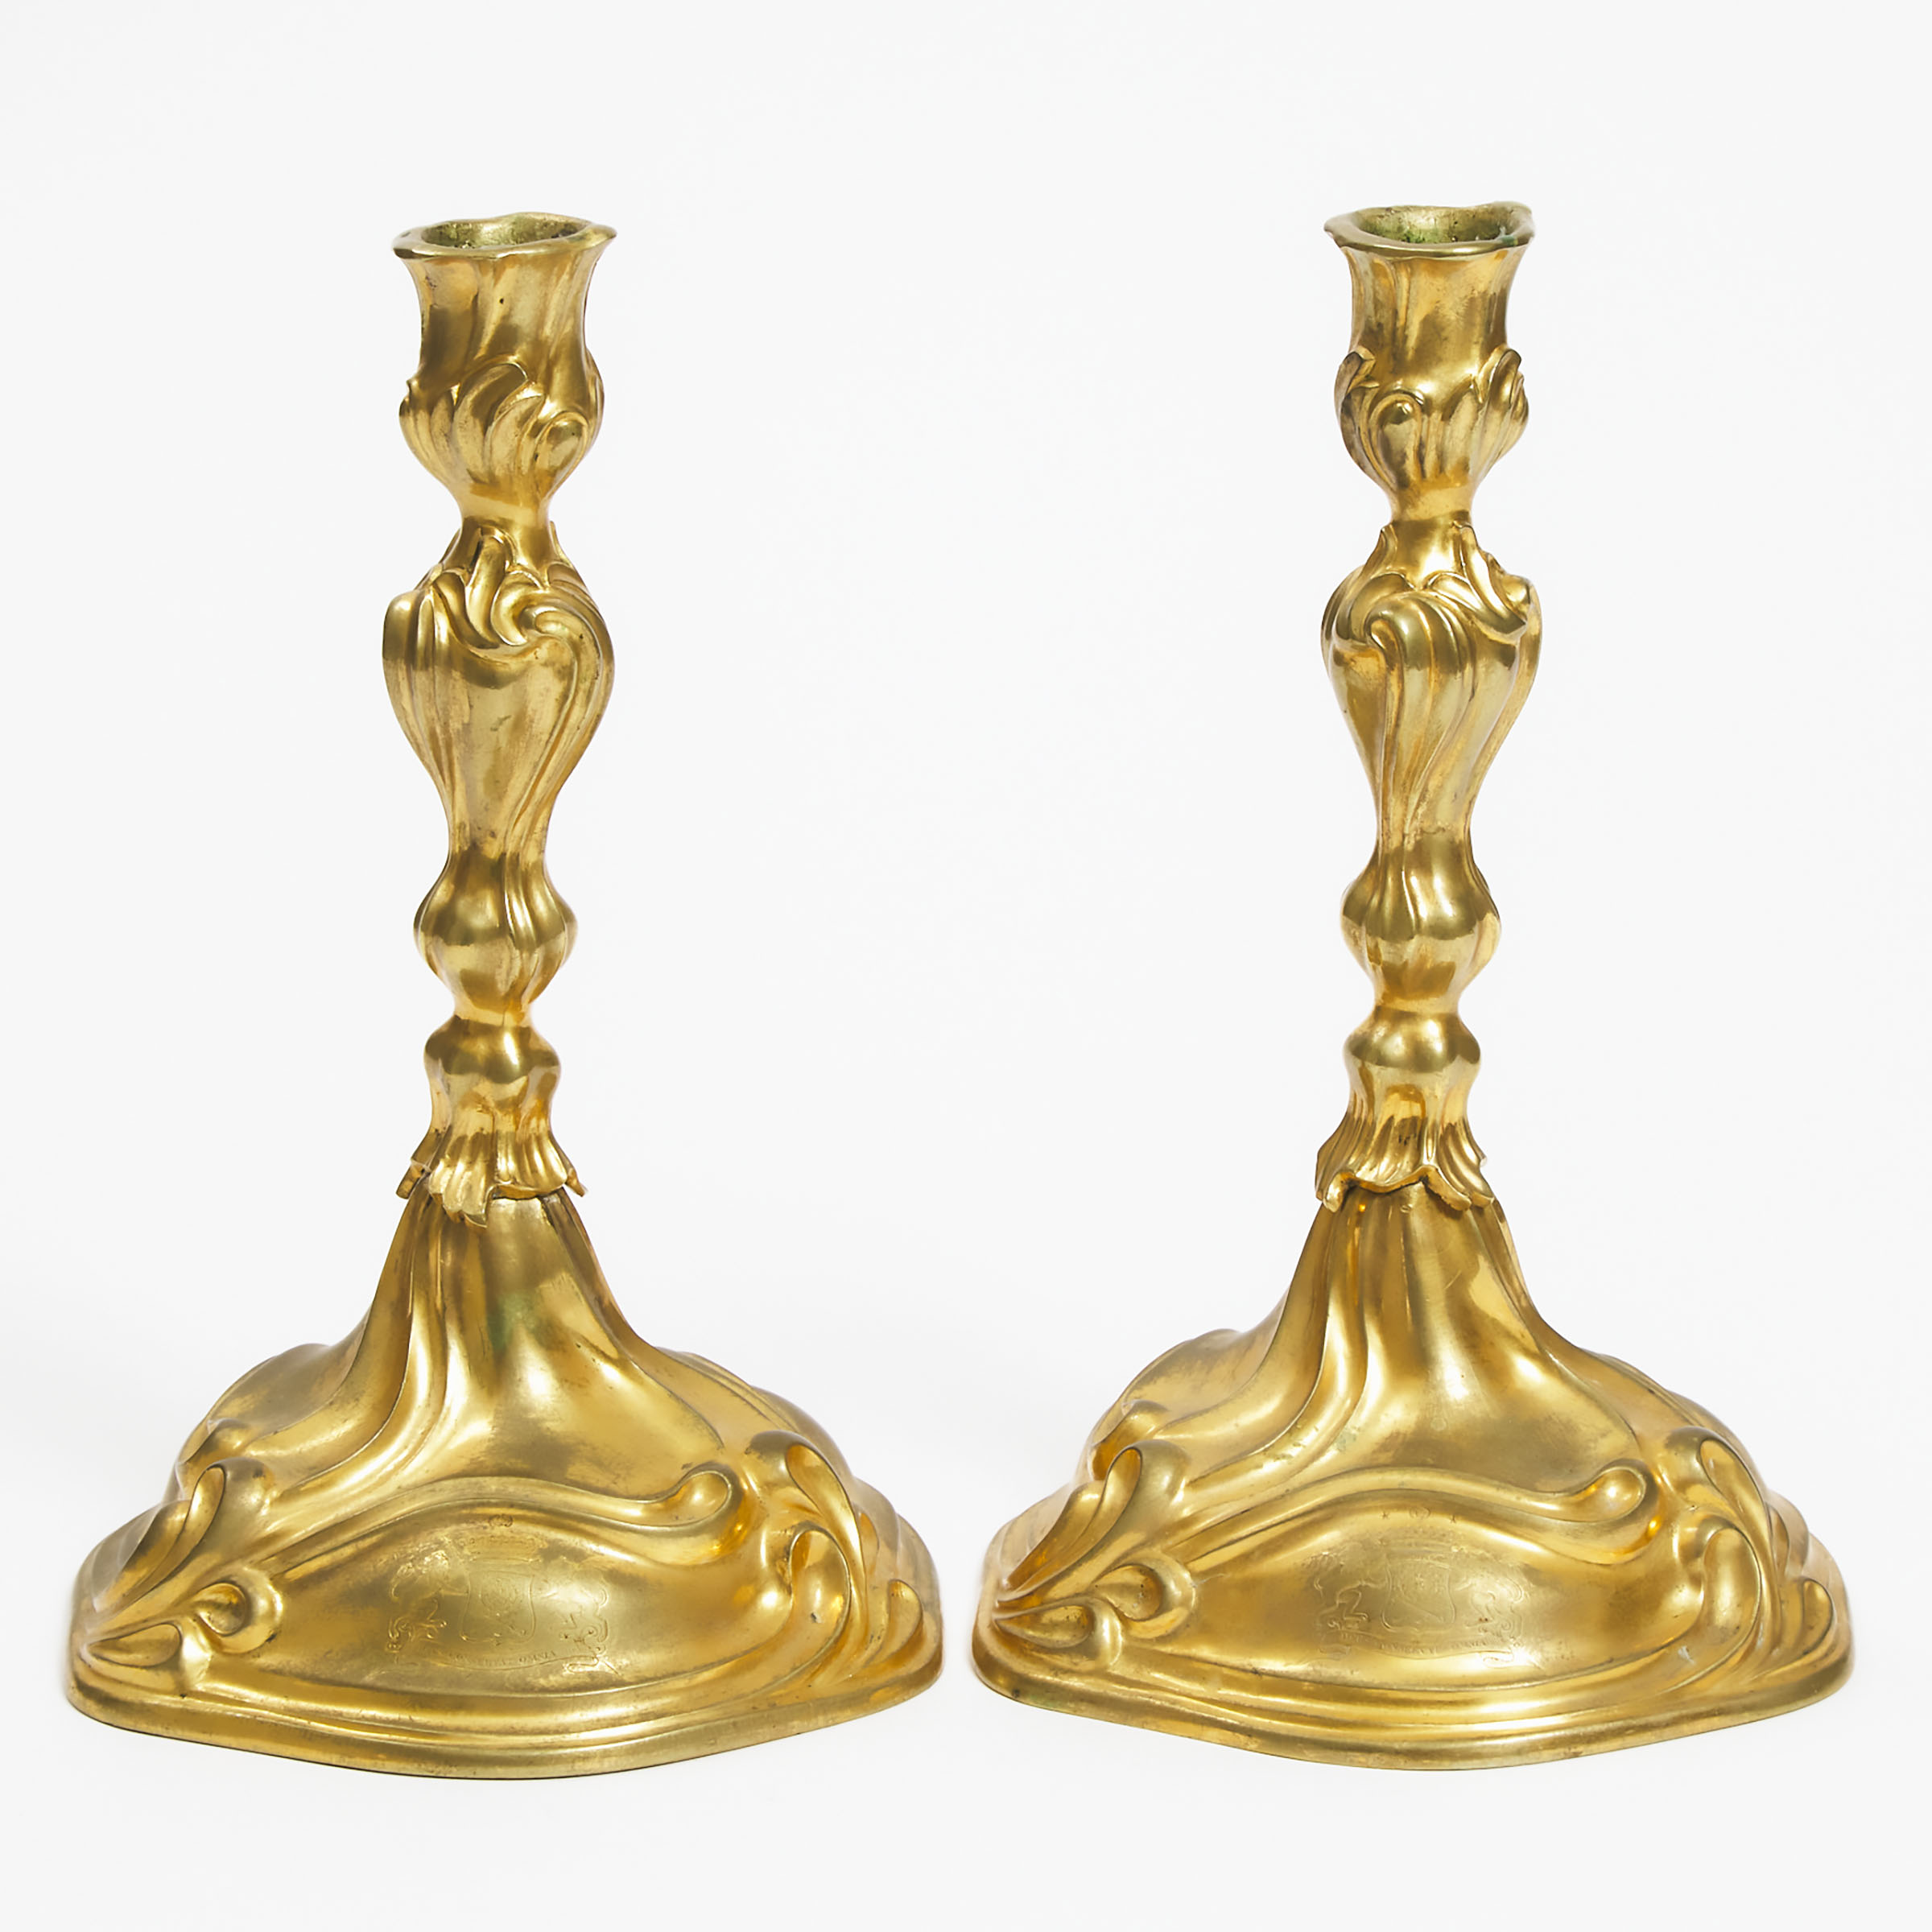 Pair of Russian Rococo Gilt Bronze Candlesticks, House of Sheremetev, c.1770